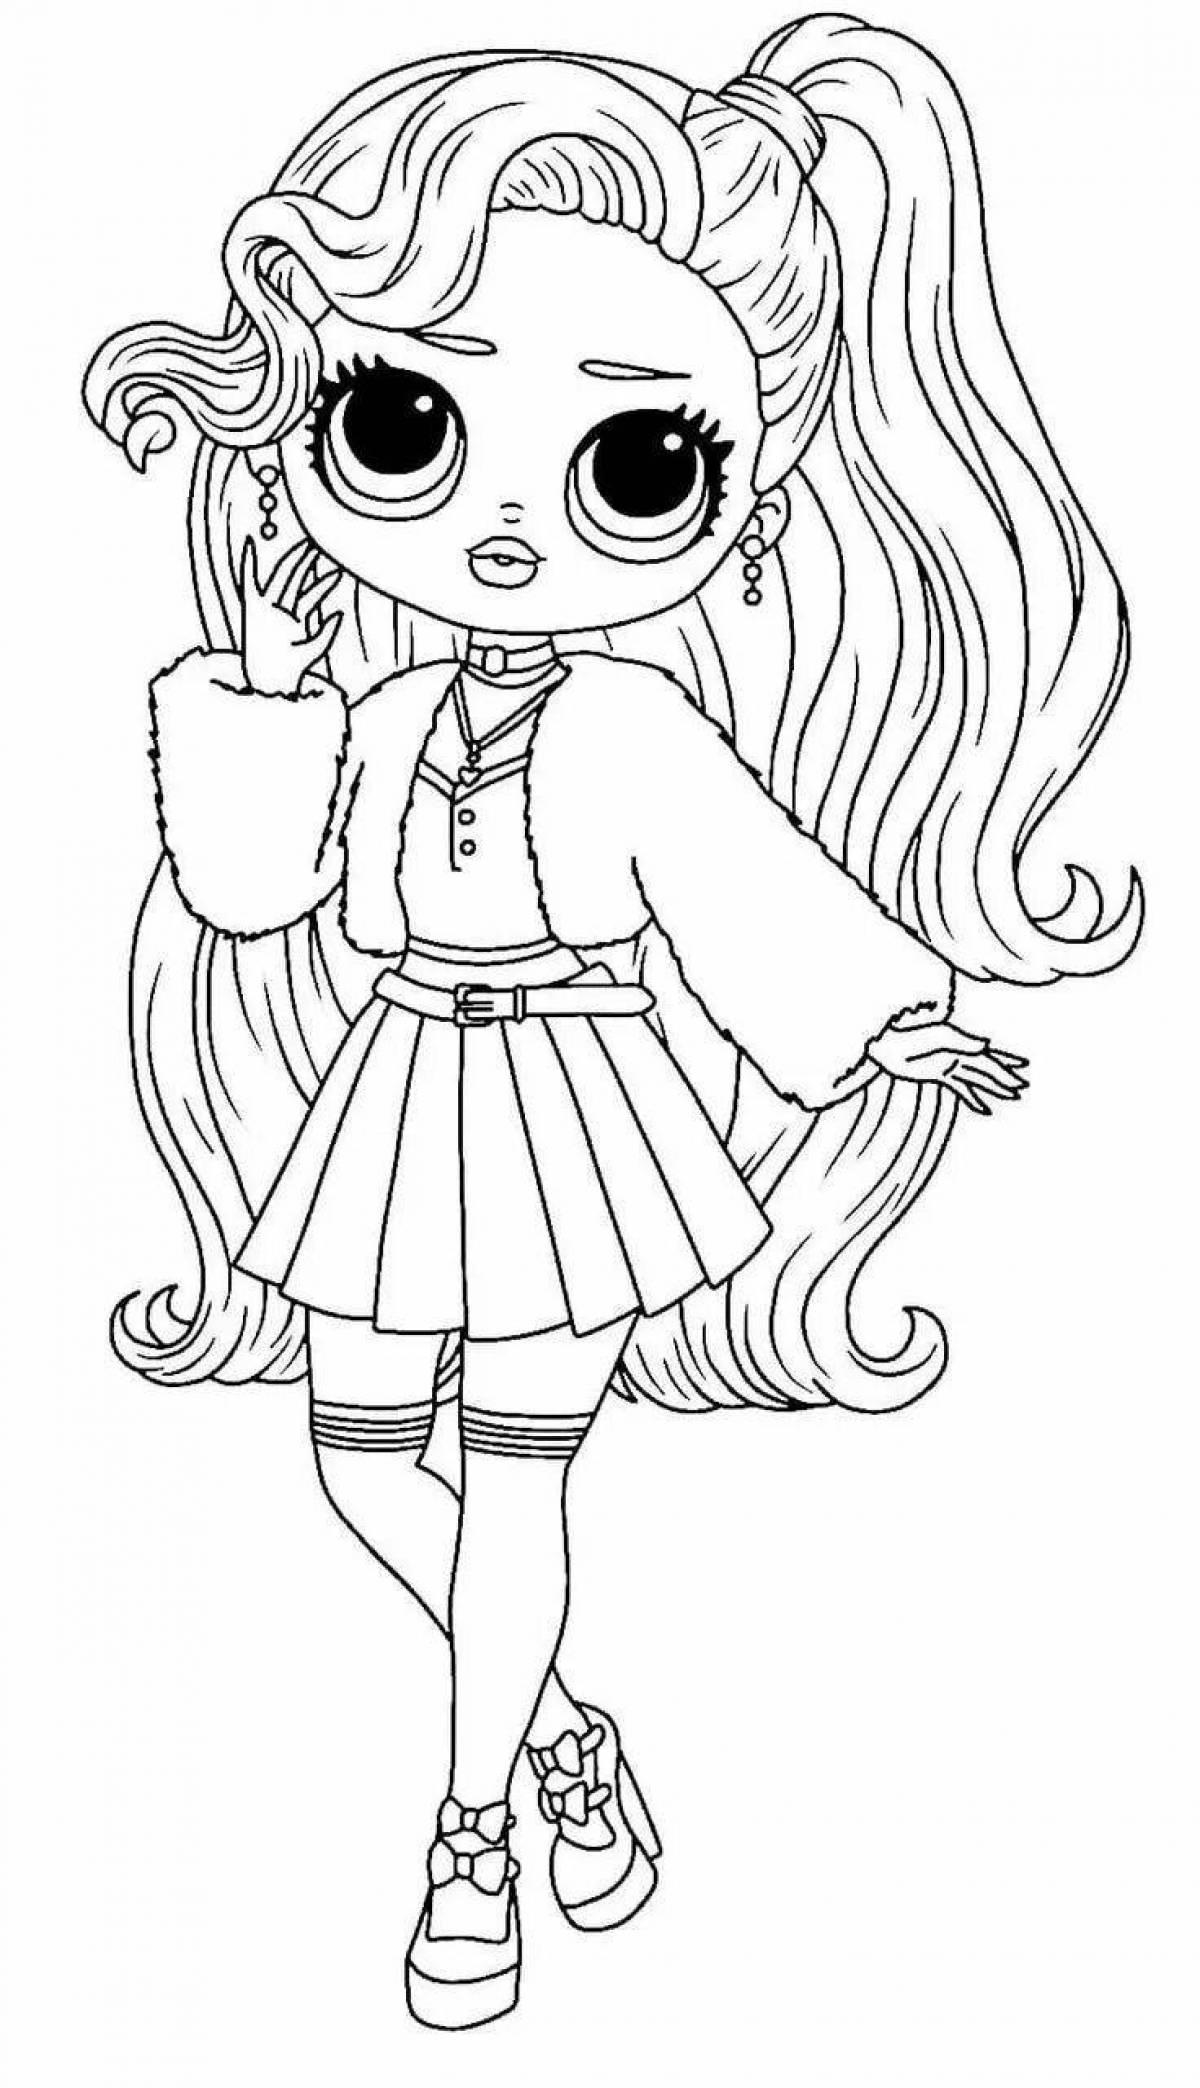 Amazing lol omji dolls coloring pages